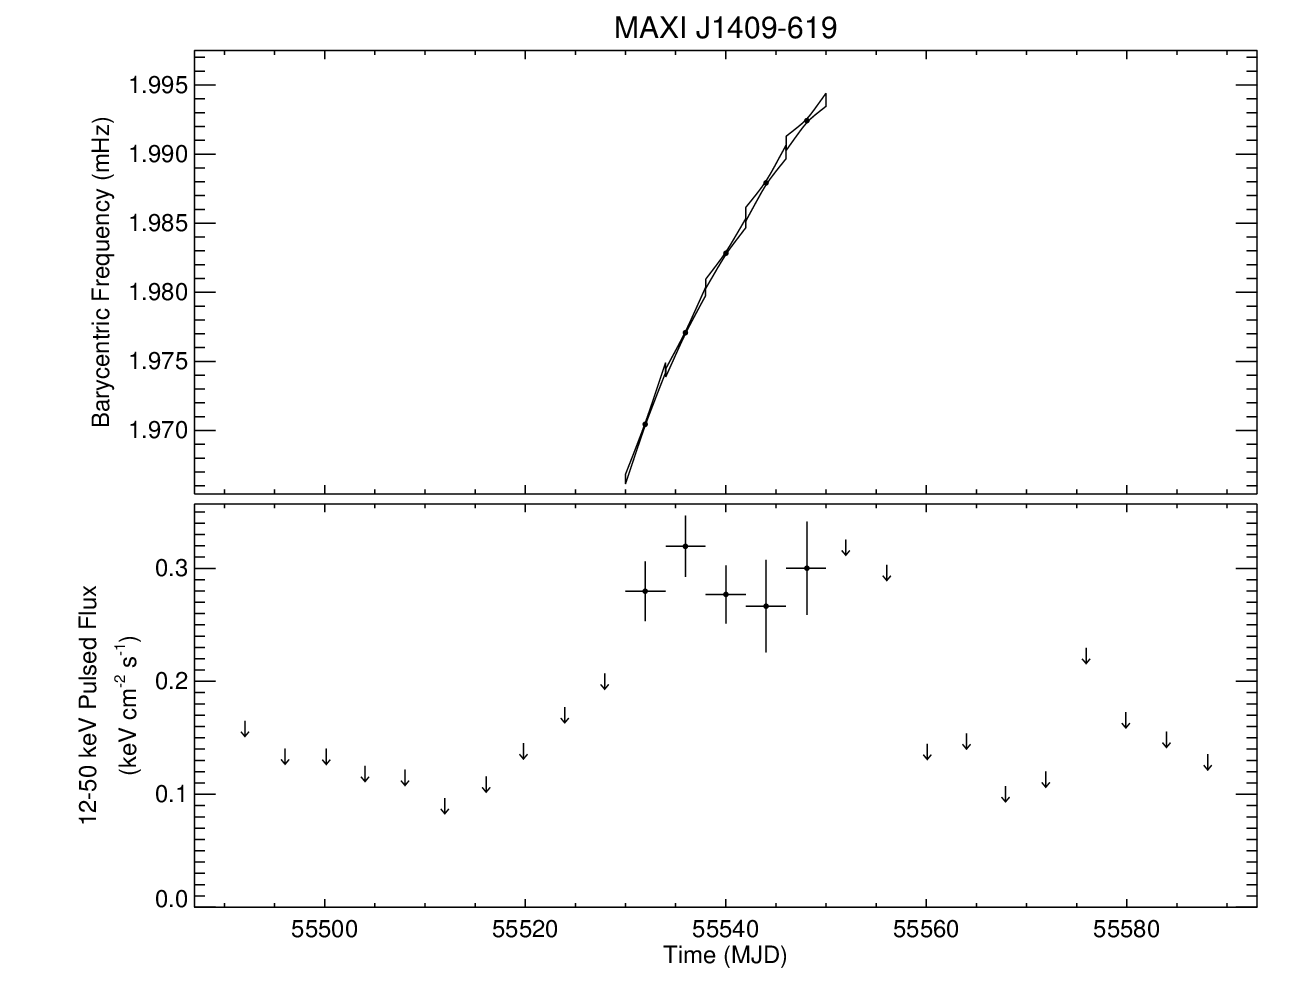 MAXI J1409-619 Short Frequency History